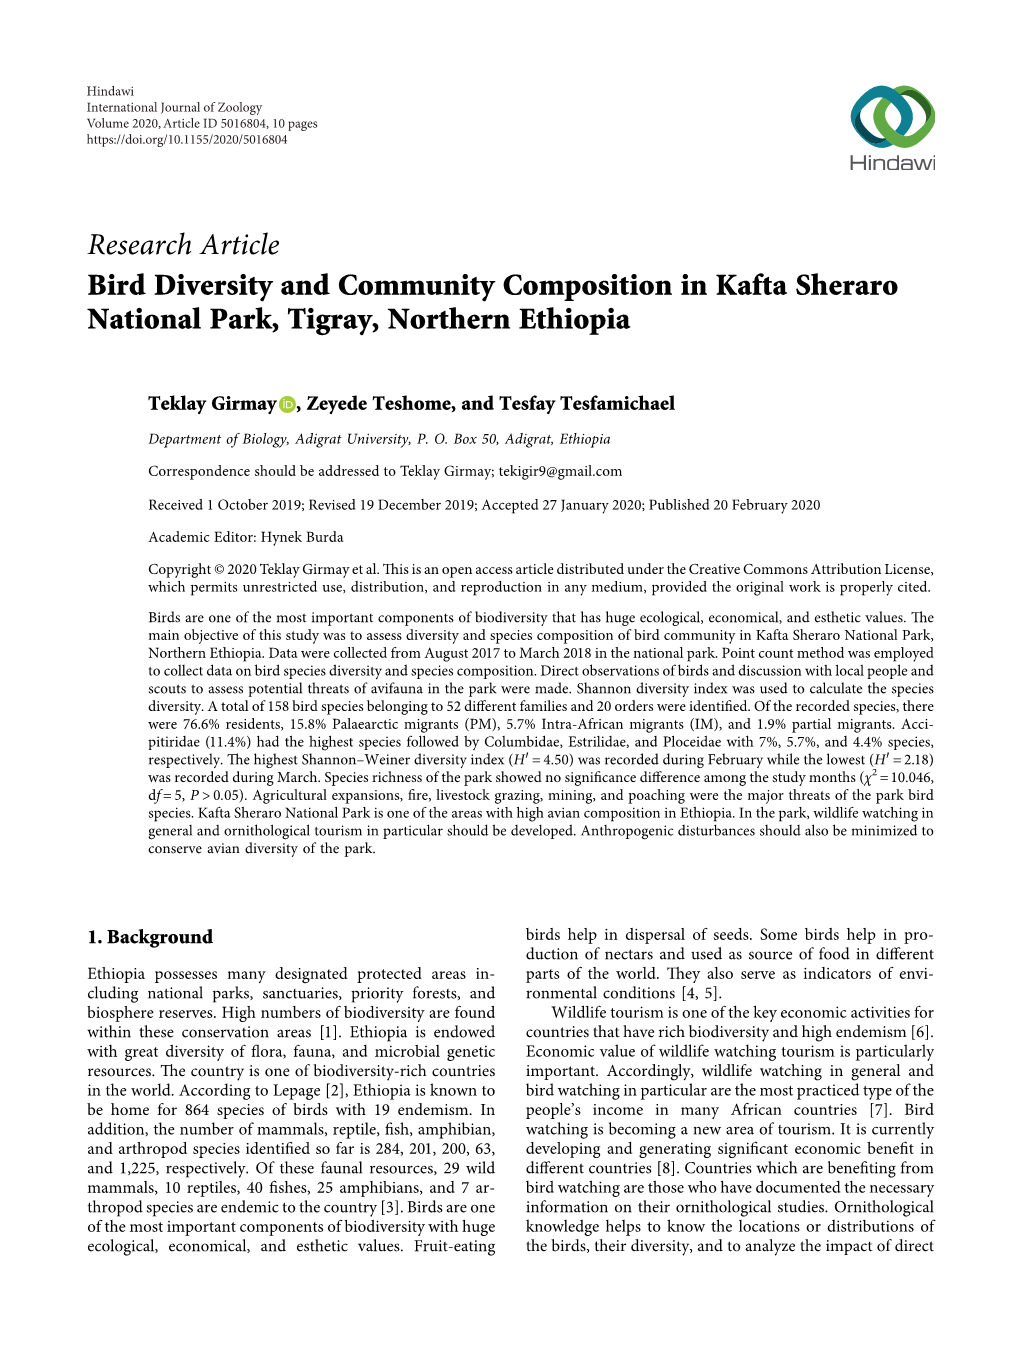 Research Article Bird Diversity and Community Composition in Kafta Sheraro National Park, Tigray, Northern Ethiopia